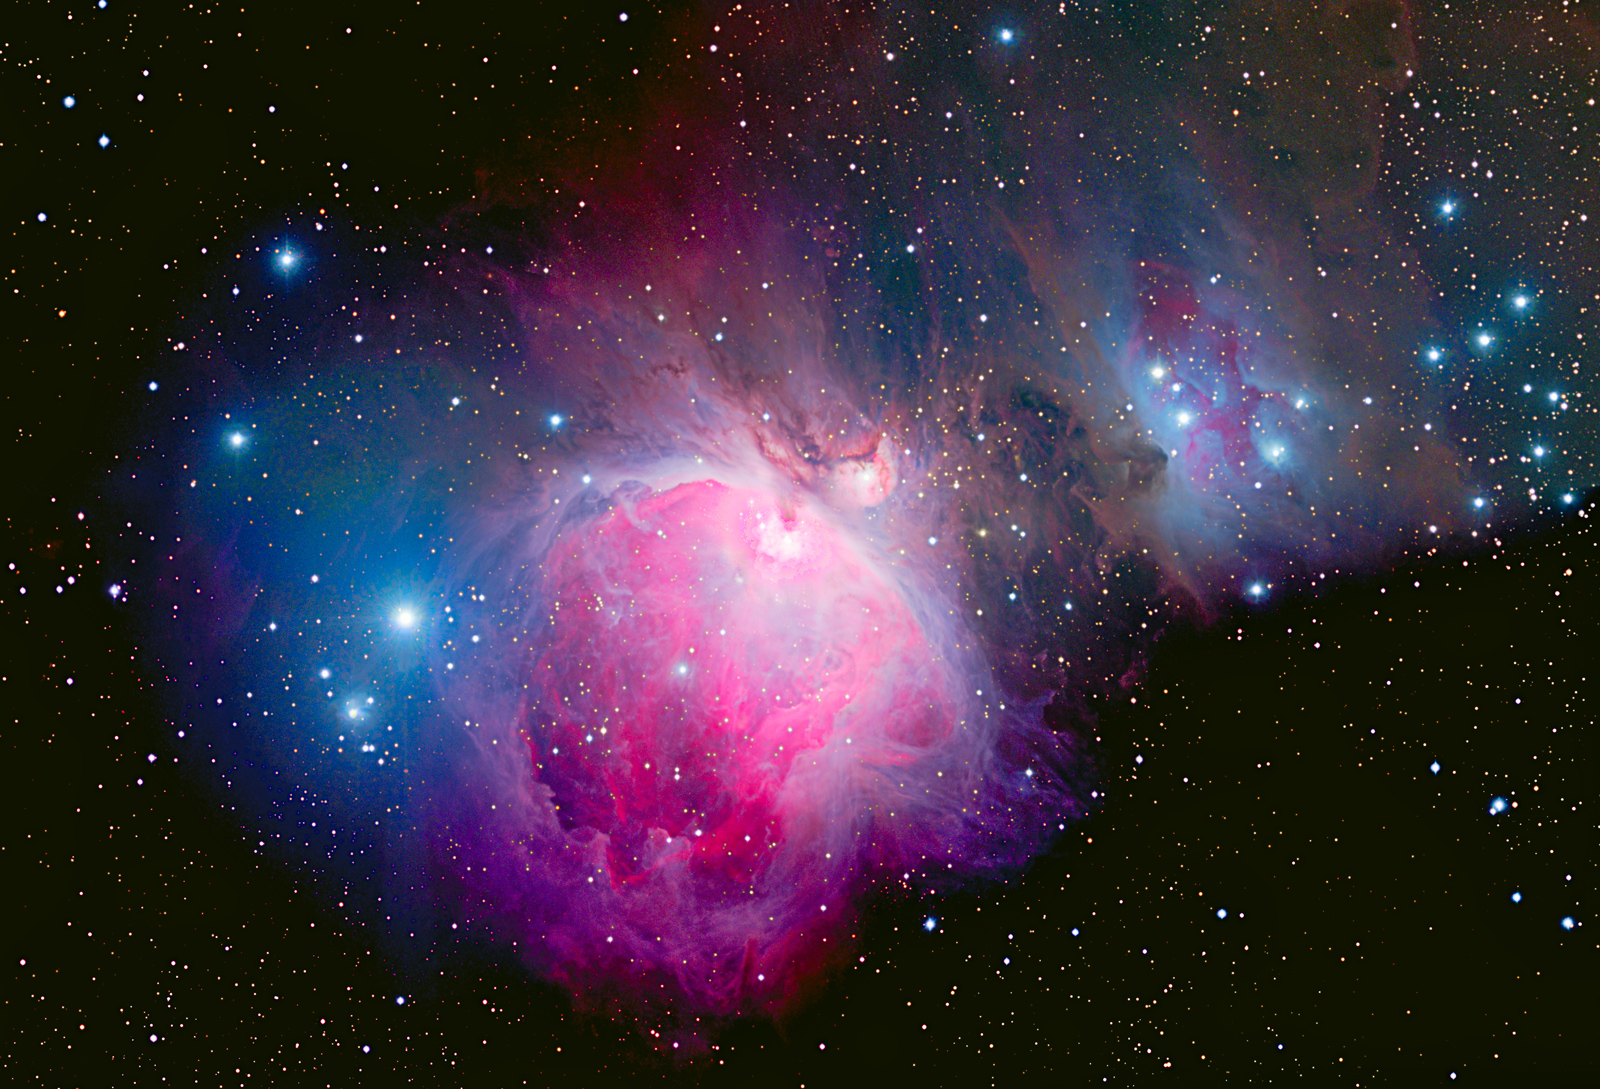 ESA - The Orion Nebula, also known as M42